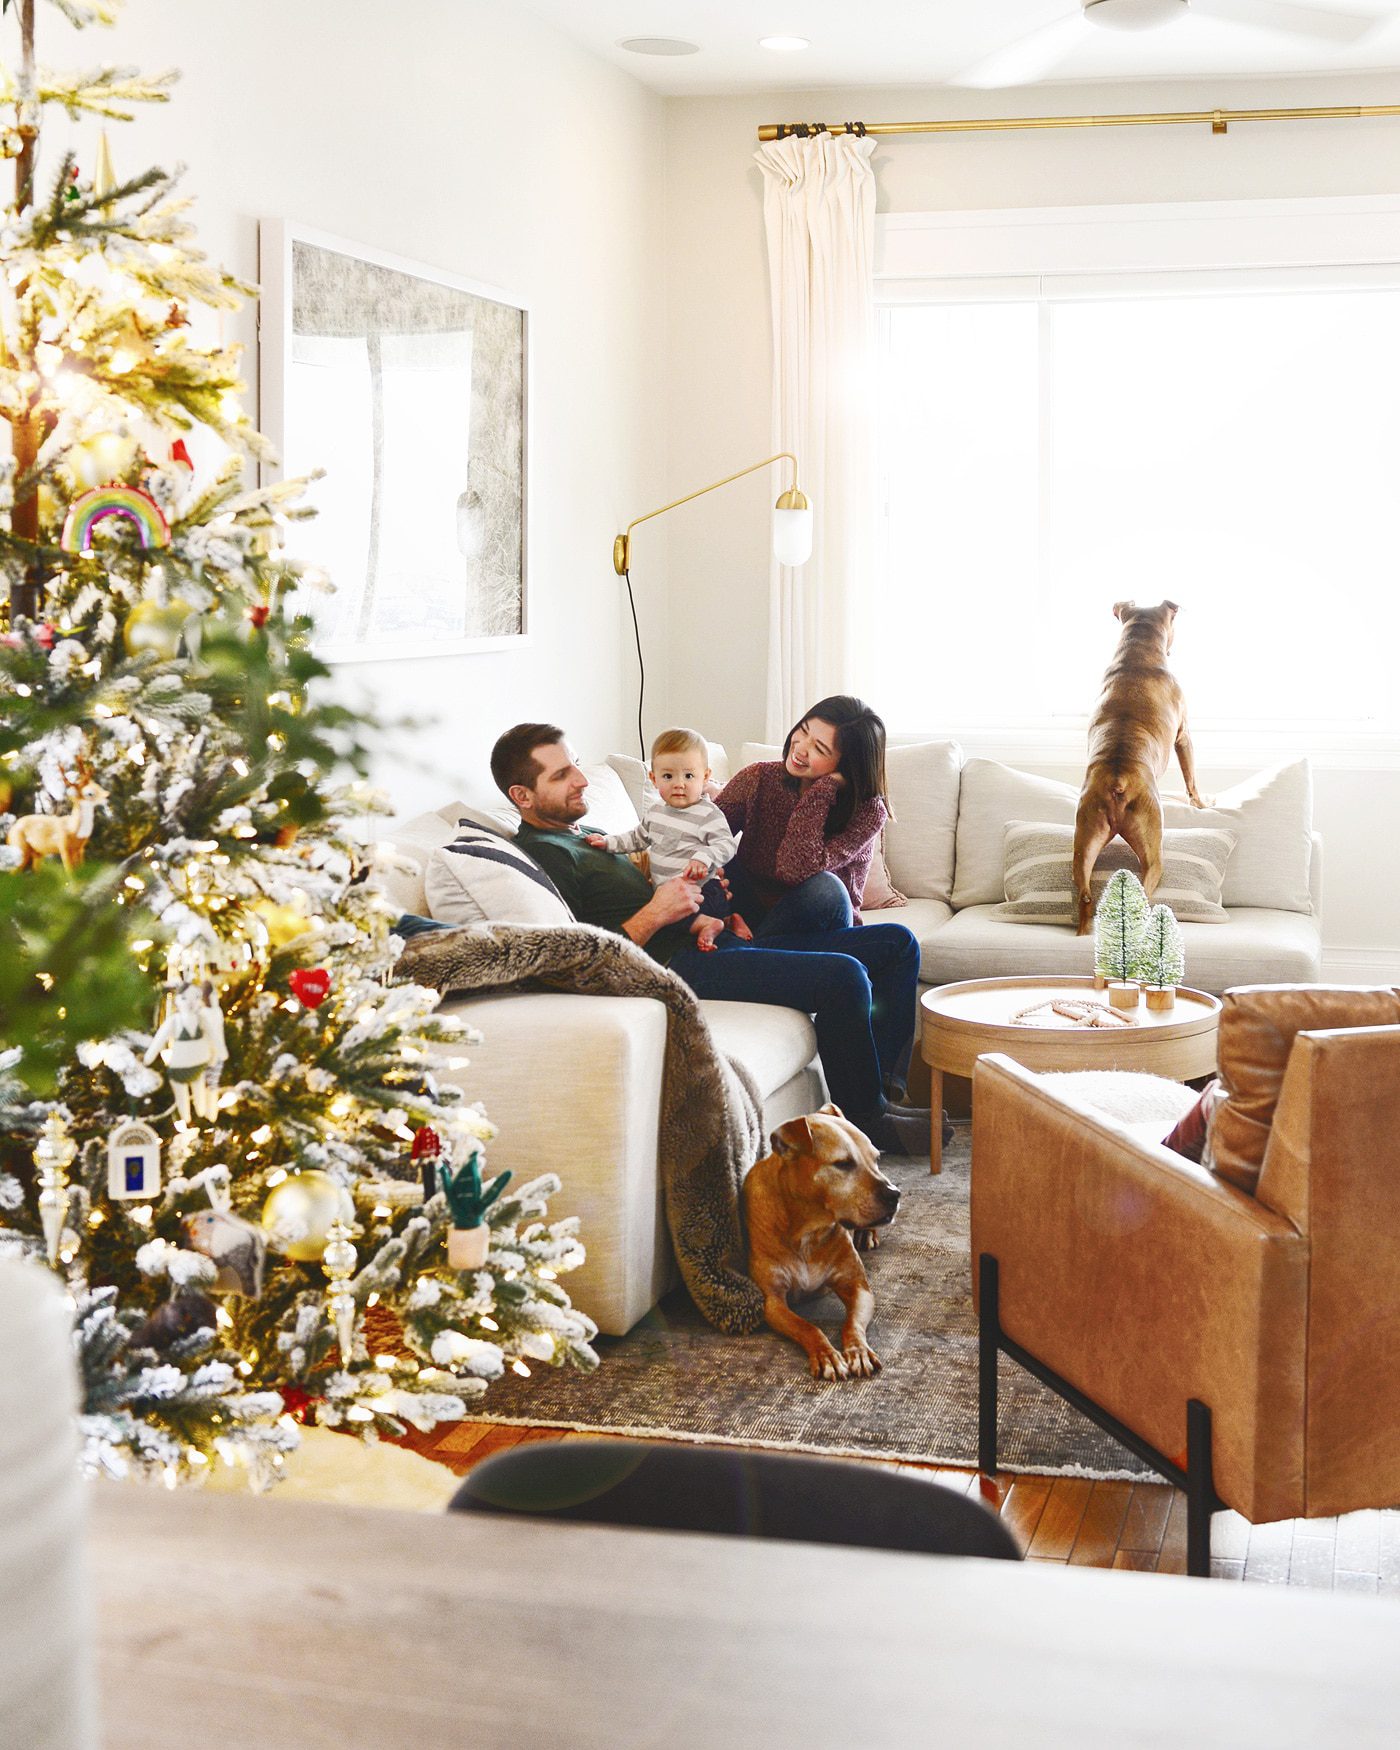 Merry Christmas! Happy Holidays! Neutral holiday living room with flocked Christmas tree // via Yellow Brick Home